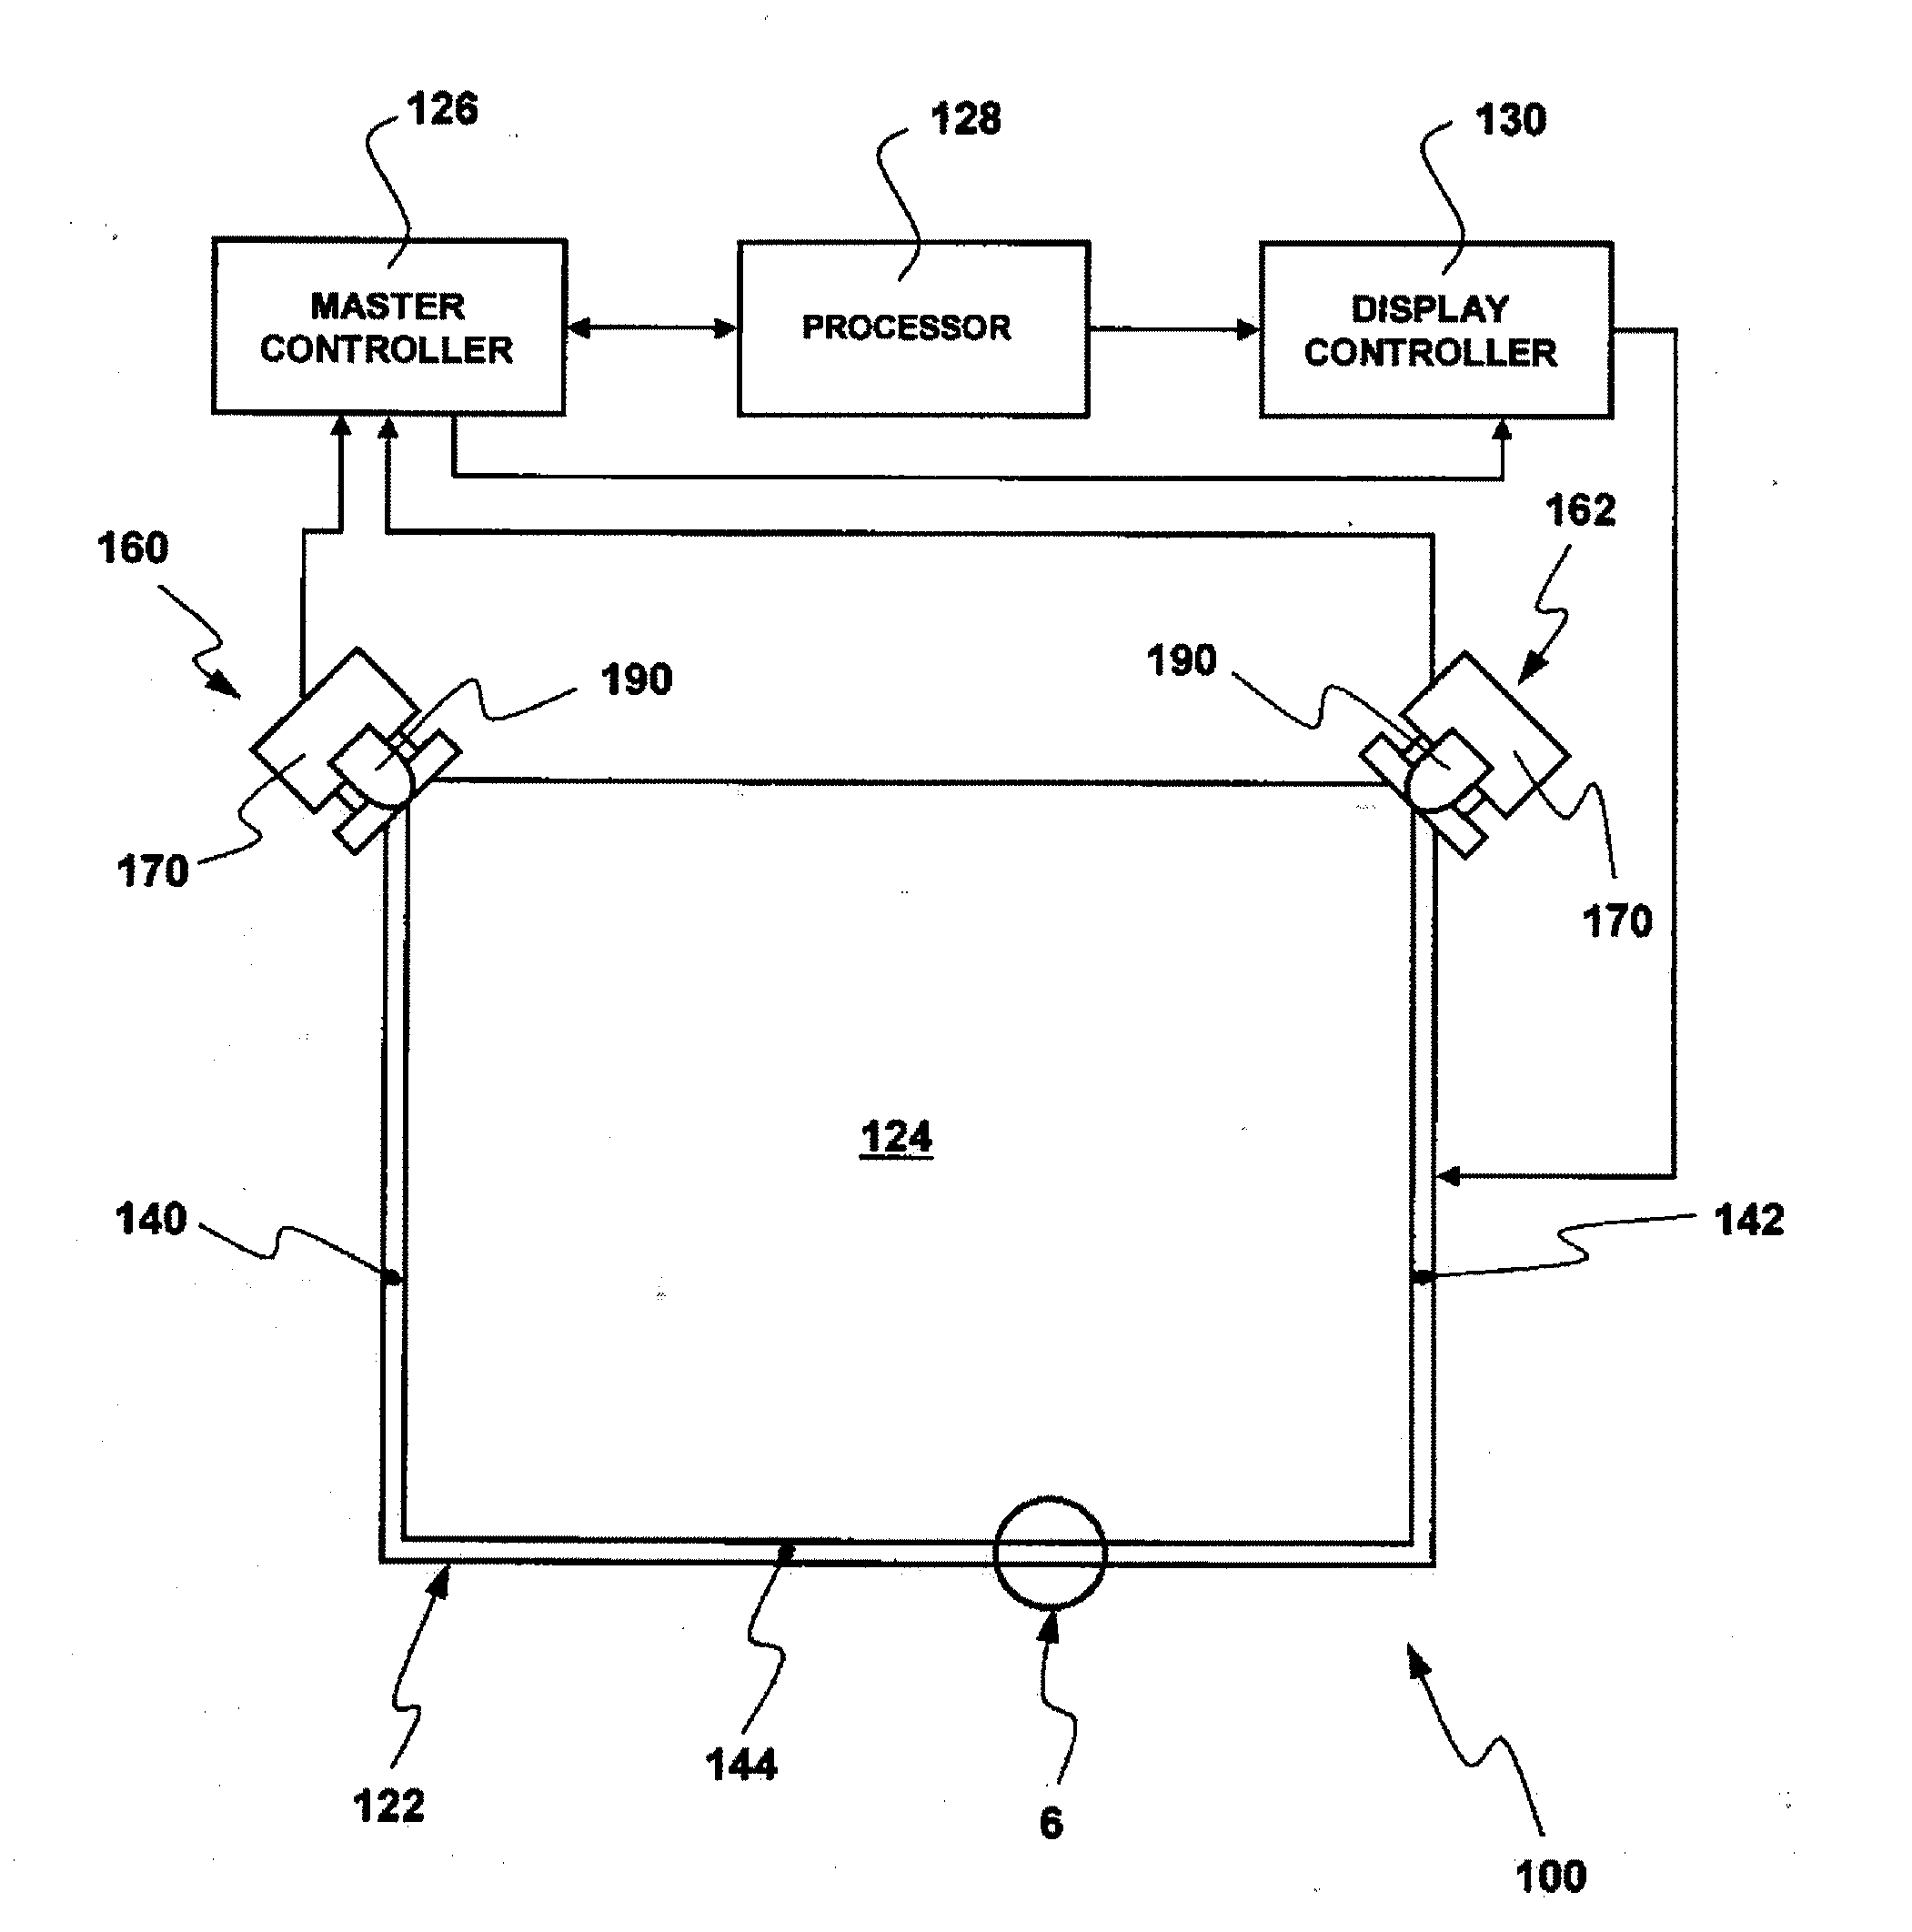 Interactive input system incorporating multi-angle reflecting structure